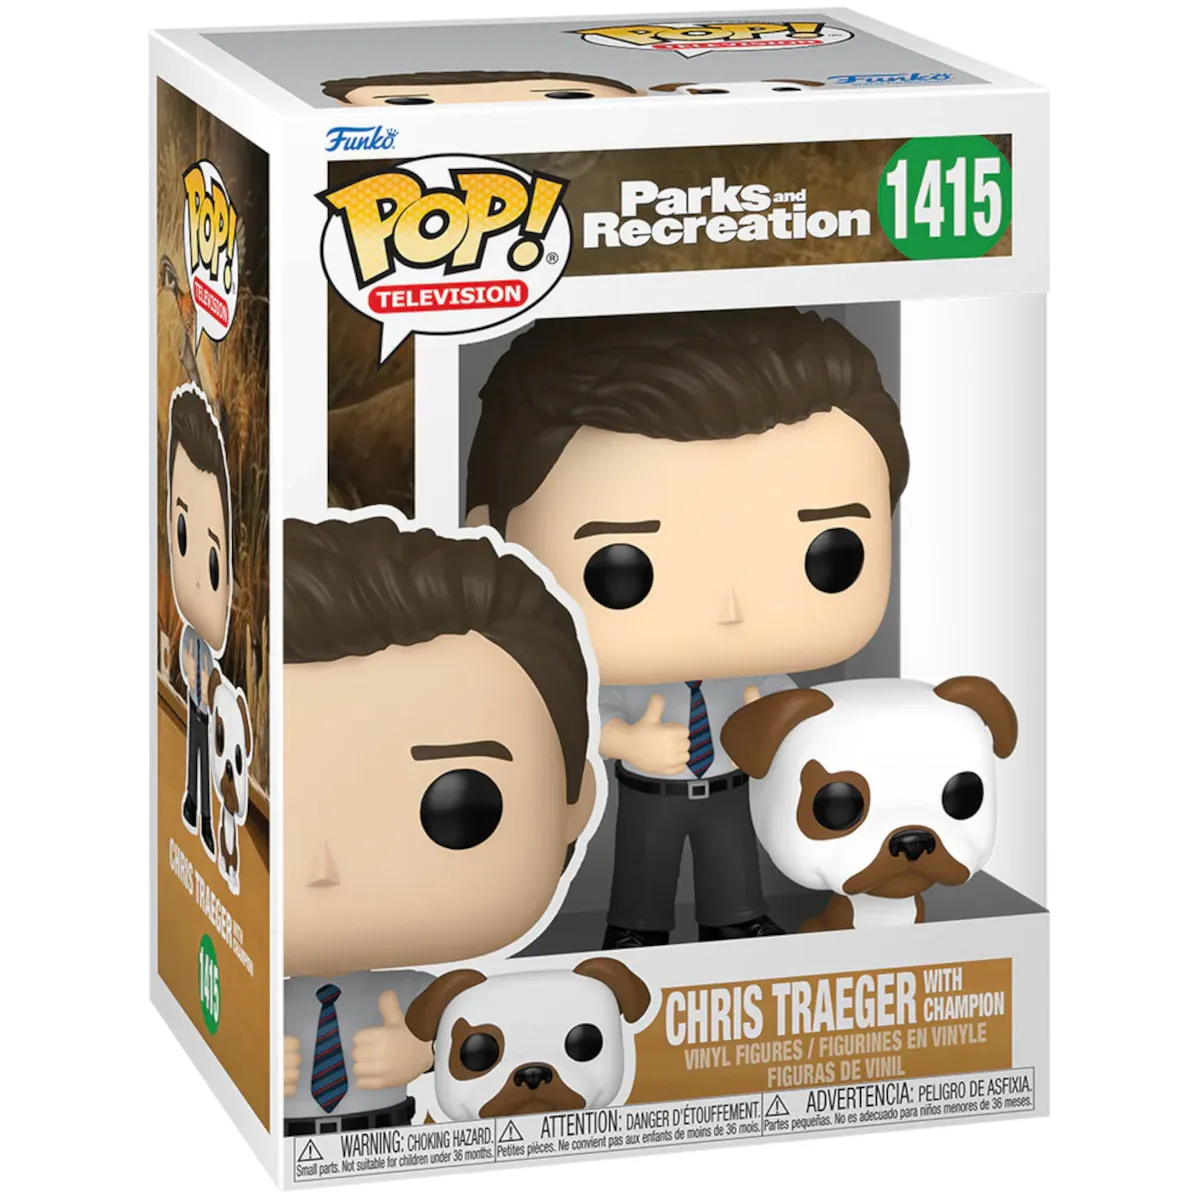 74431 Funko Pop! Television - Parks And Recreation - Chris Traeger With Champion Collectable Vinyl Figure Box Front